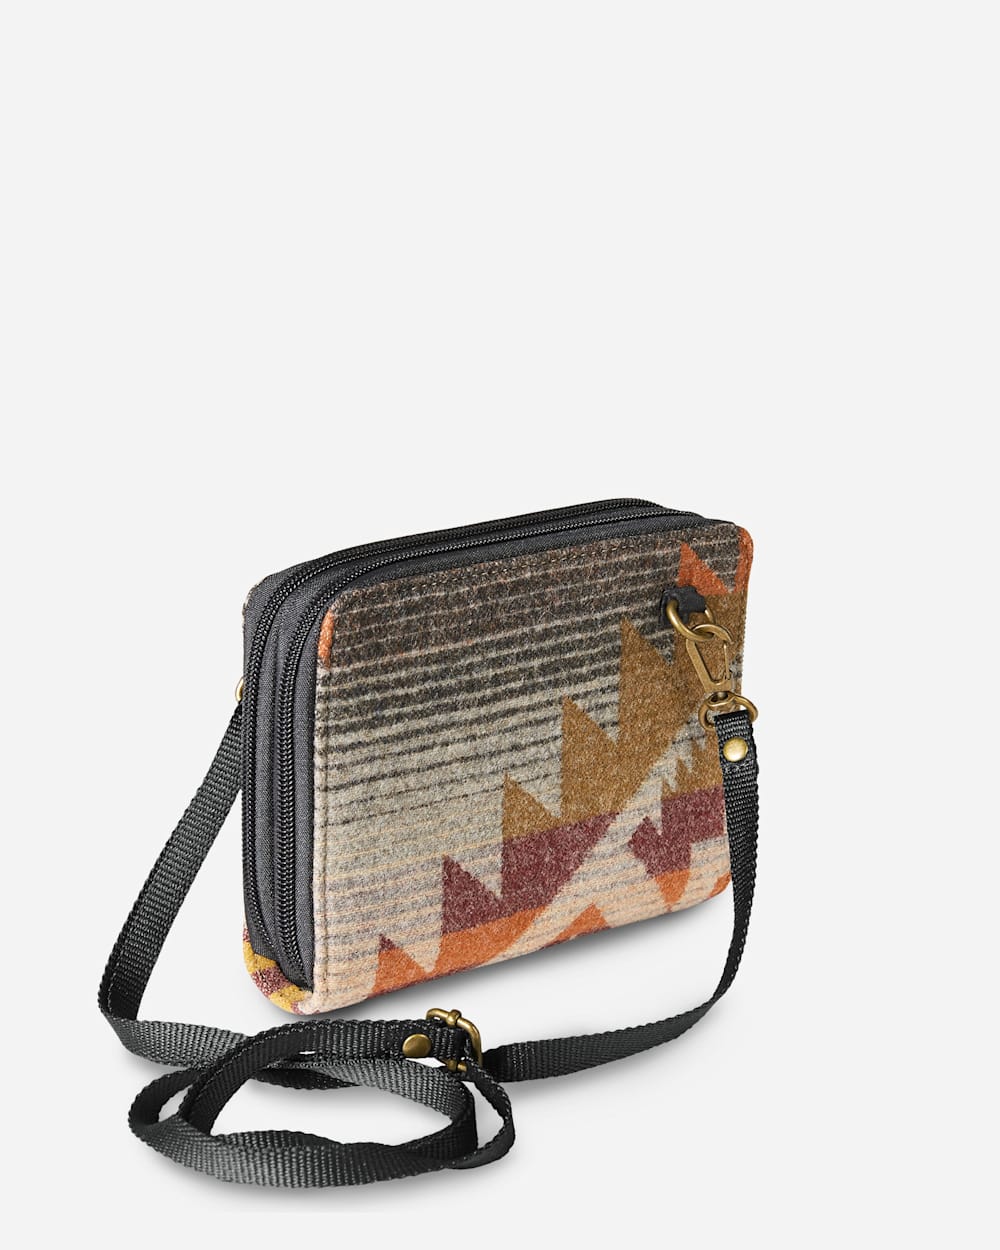 ALTERNATE VIEW OF JACQUARD WALLET ON STRAP IN ROCK CREEK CHARCOAL image number 2